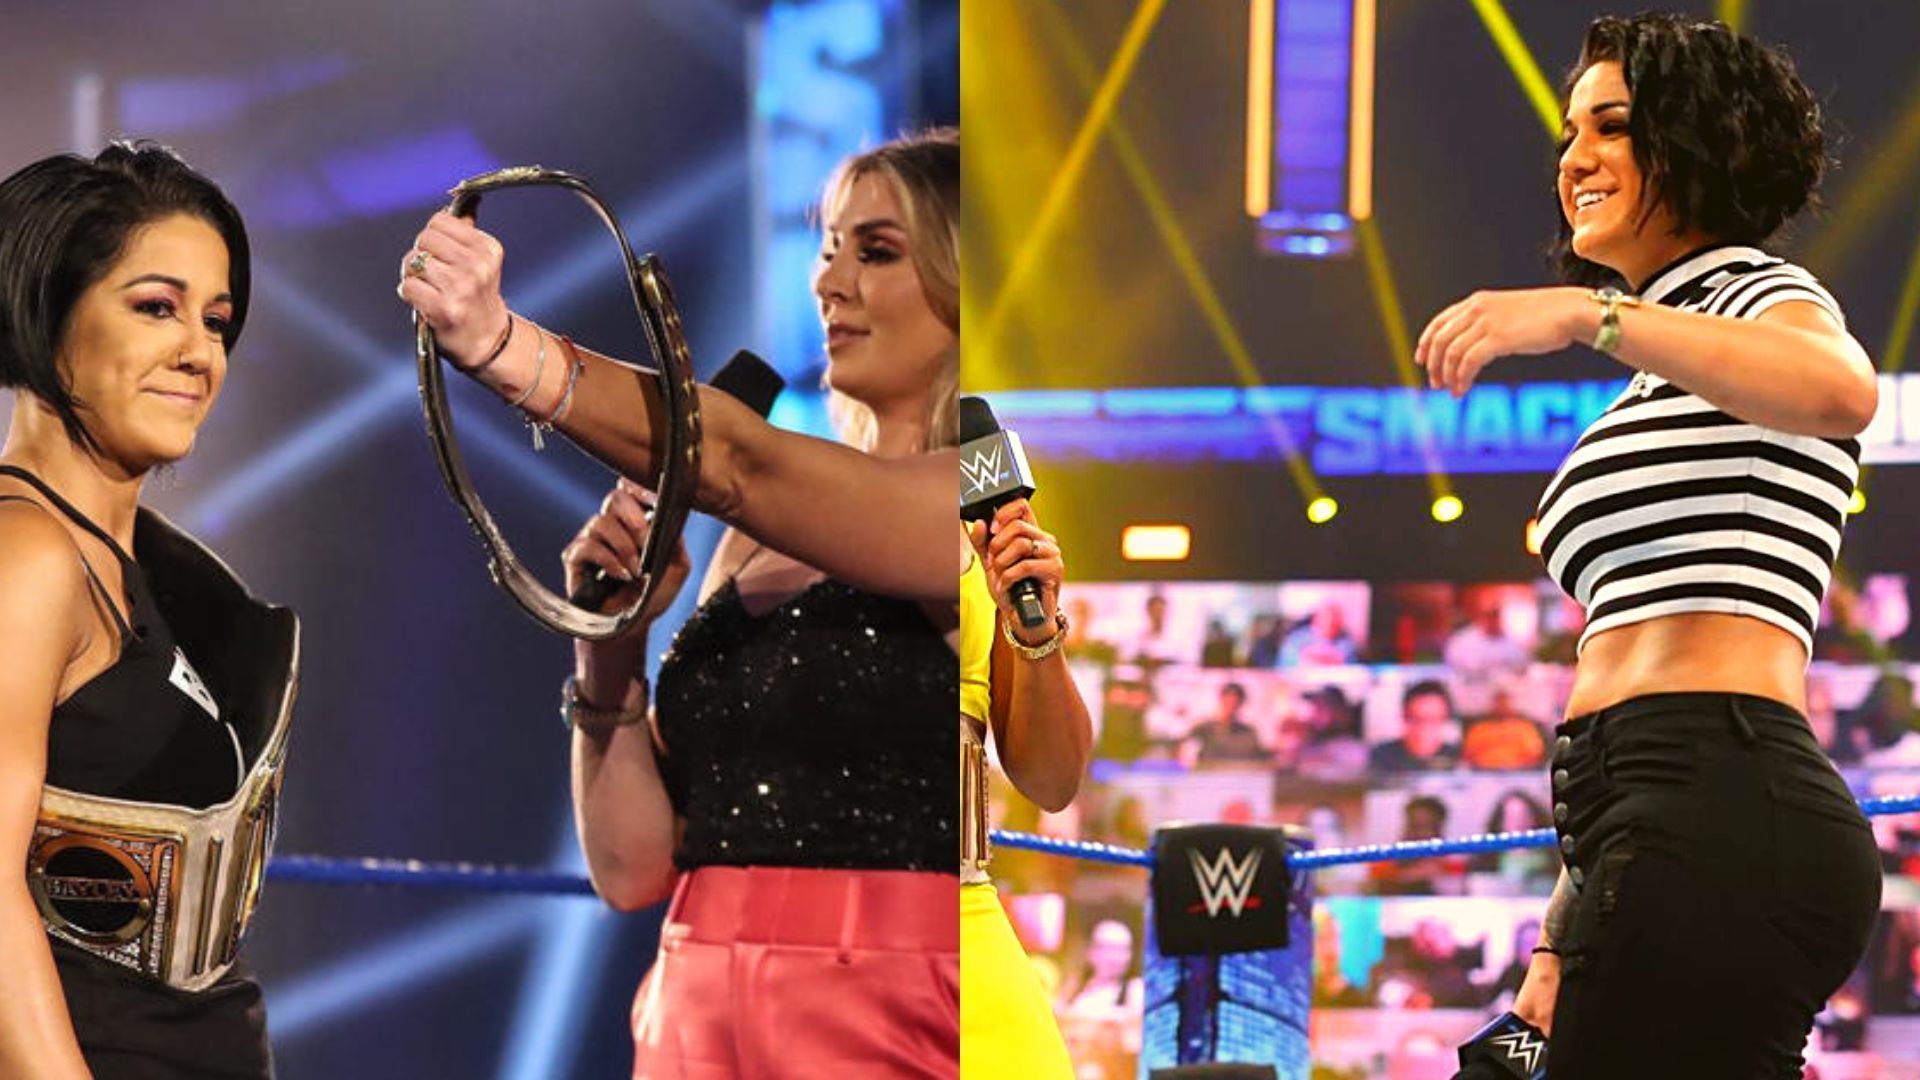 Bayley faced Charlotte Flair at a recent live event